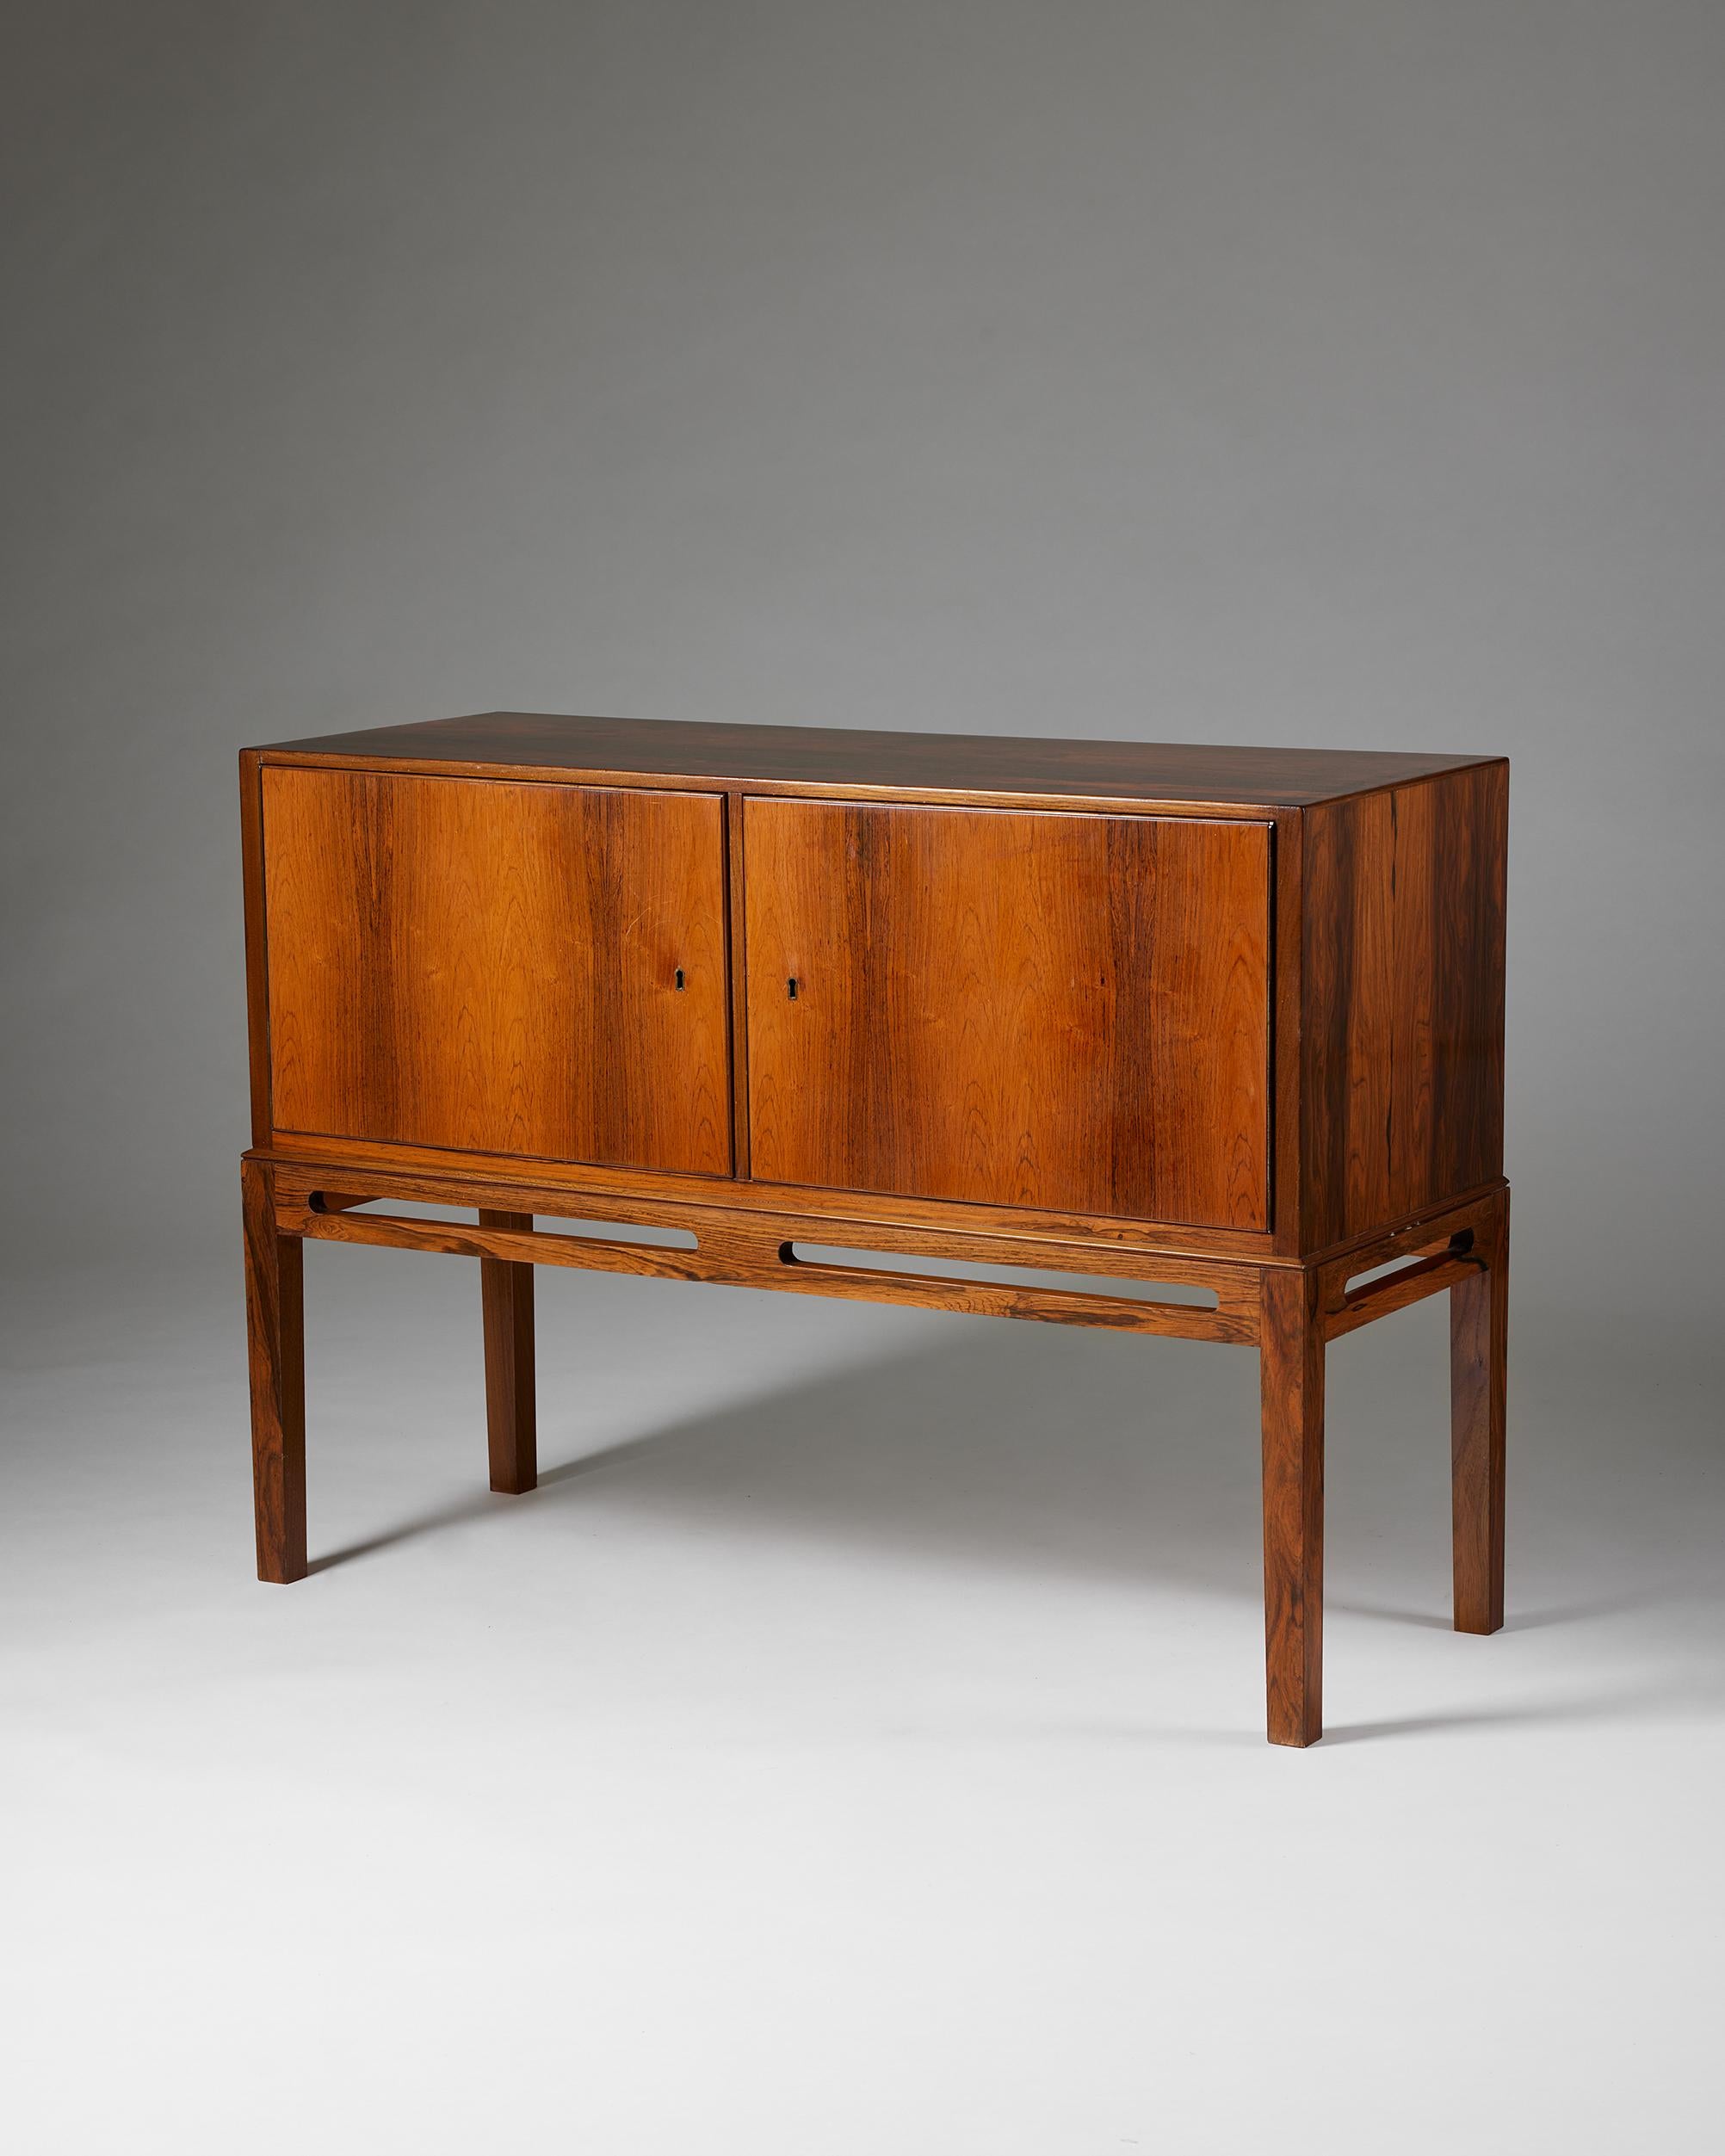 Sideboard, anonymous, for Heltborg Möbler,
Denmark, 1960s.

Rosewood.

Stamped.

Dimensions: 
H: 80.5 cm / 2' 7 3/4''
W: 110.5 cm / 3' 7 1/2''
D: 42 cm / 16 1/2''